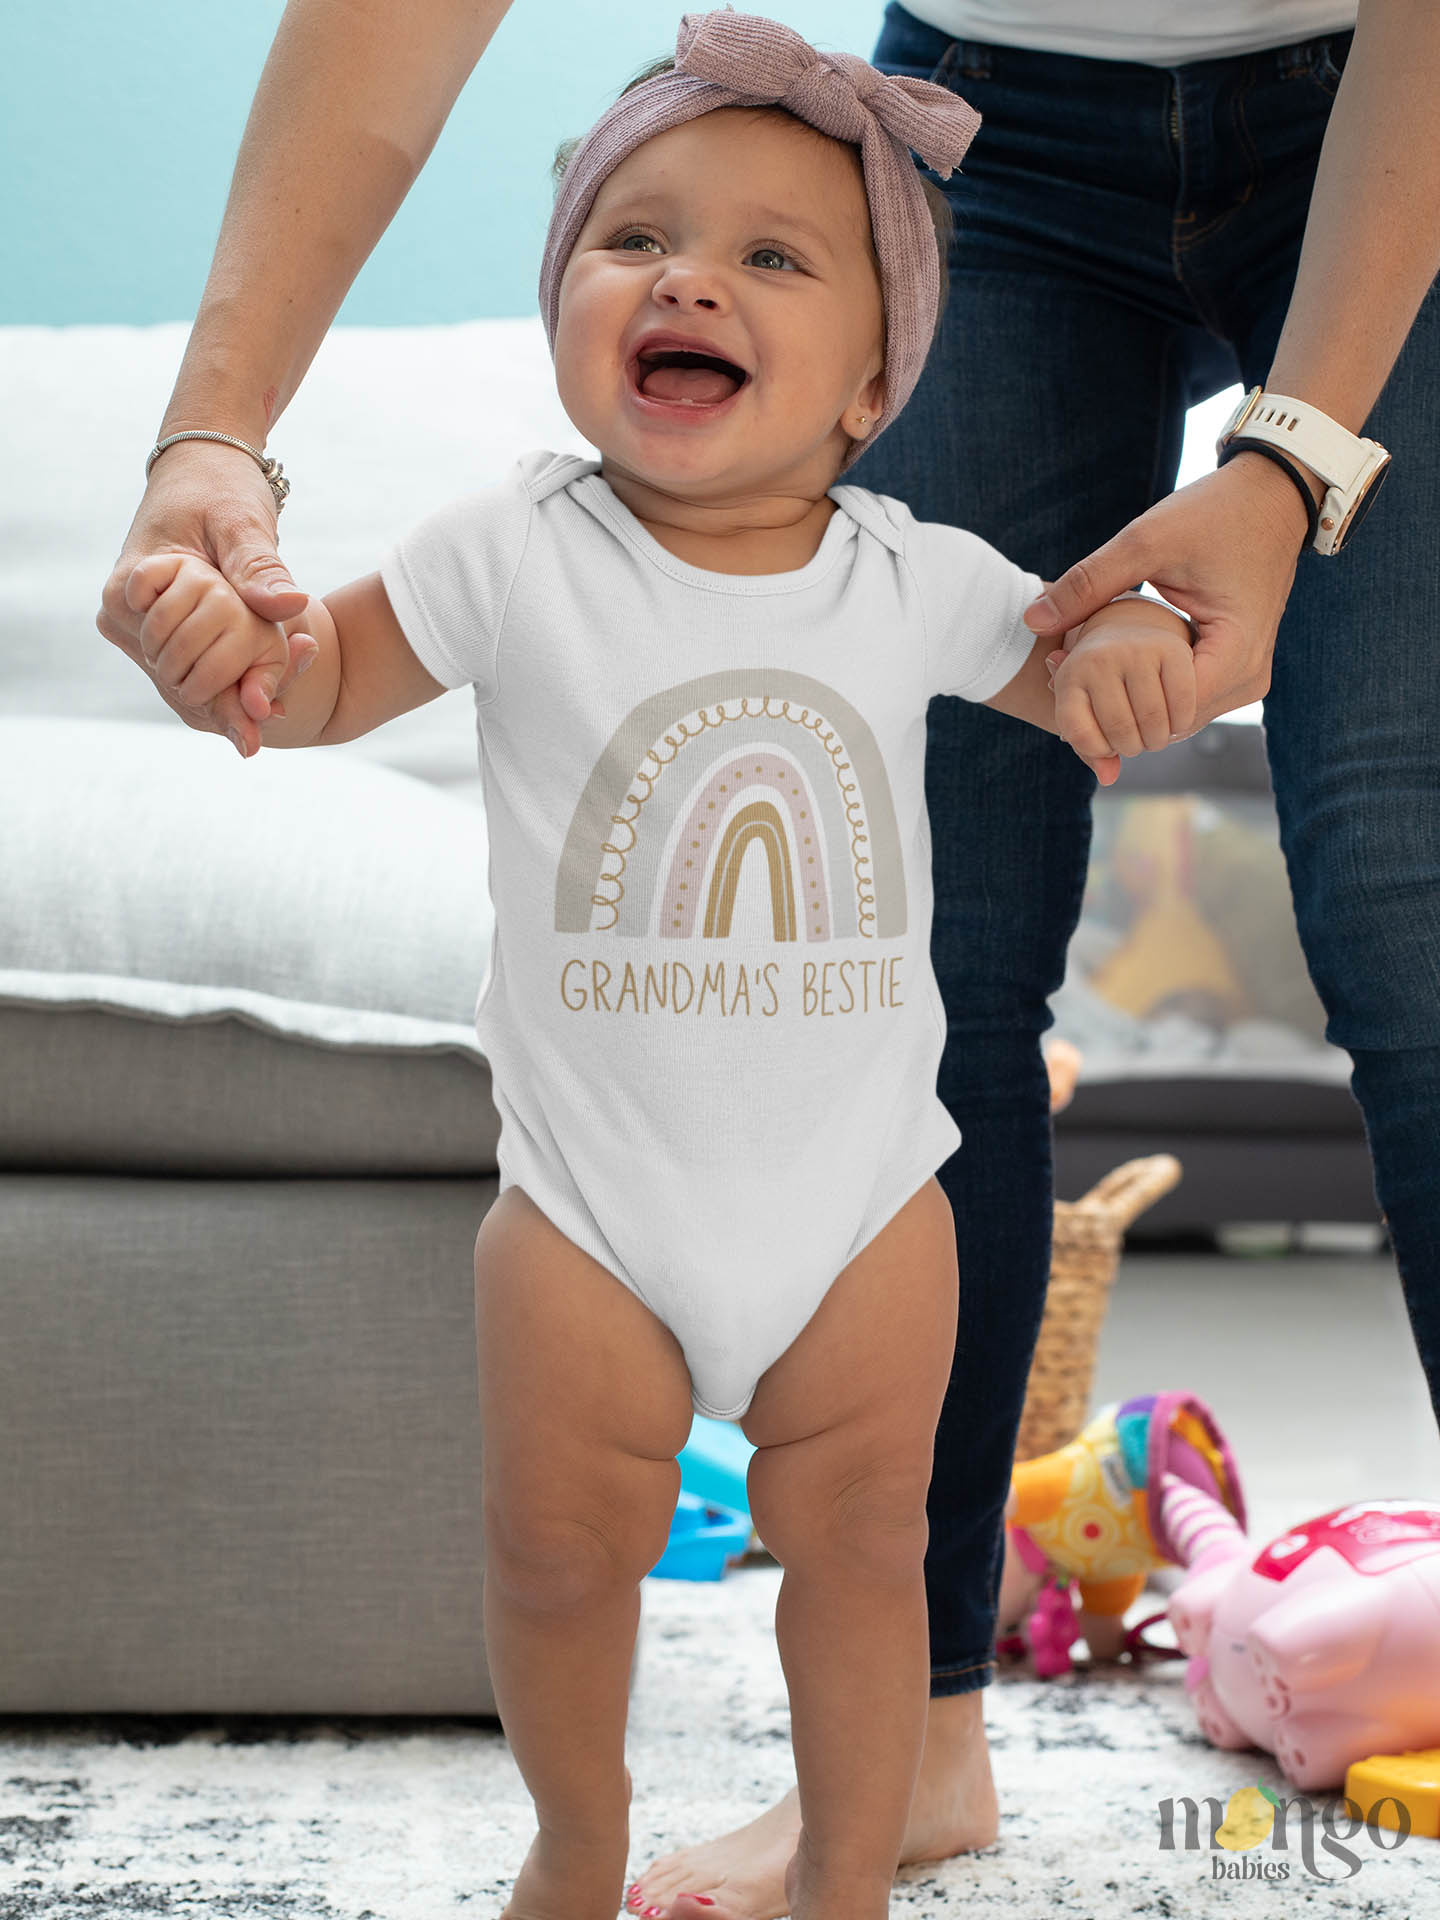 Baby Bodysuit adorned with a delightful printed graphic of a radiant rainbow and the text 'Auntie's Bestie.' This charming tee celebrates the cherished bond between a beloved aunt and her adored niece or nephew.